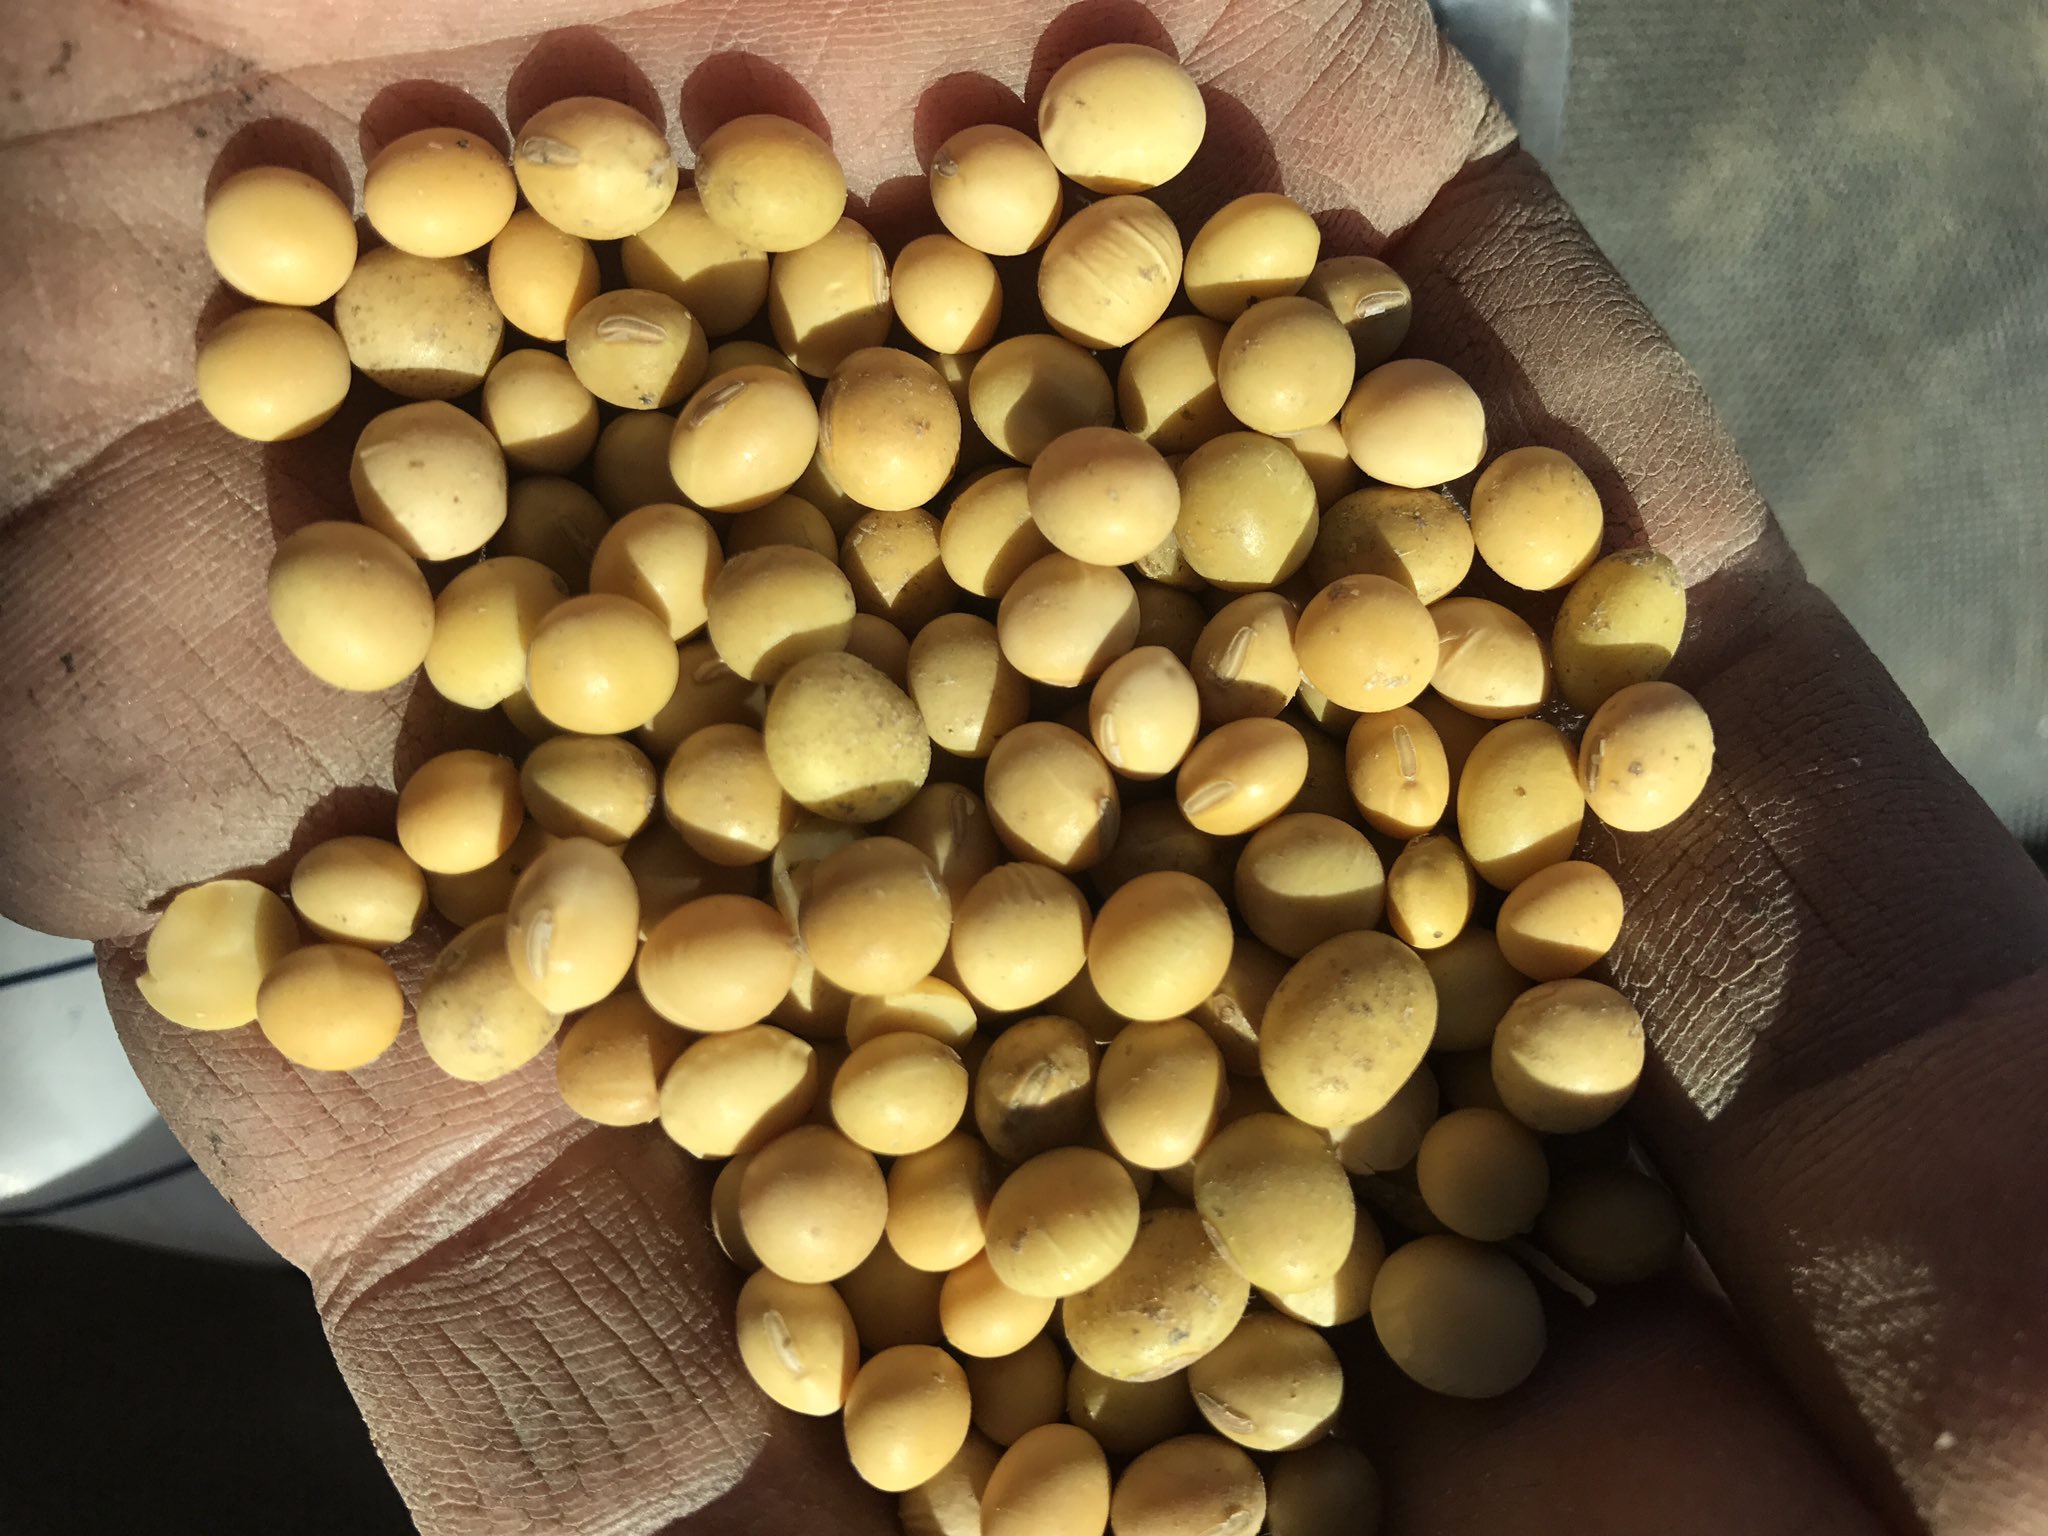 Soybeans in hand